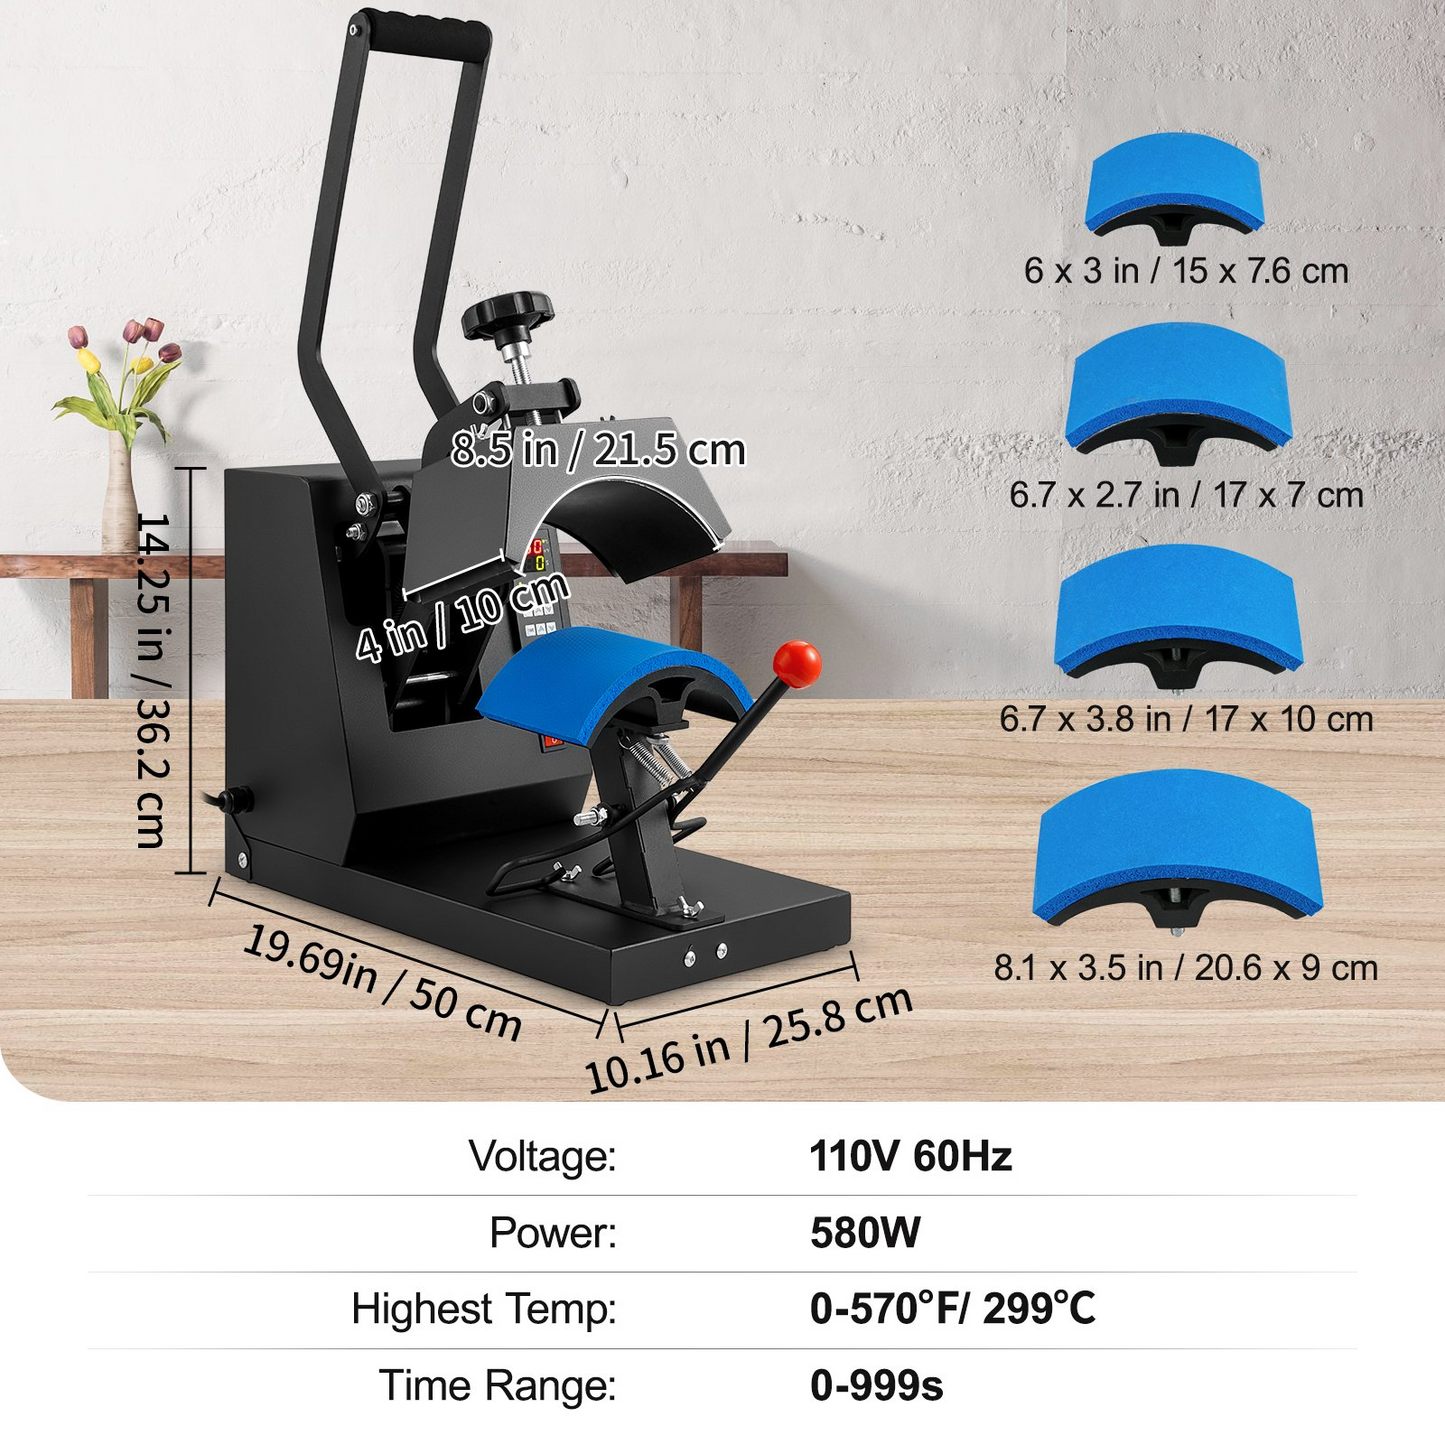 VEVOR Hat Heat Press, 4-in-1 Cap Heat Press Machine, 6x3inches Clamshell Sublimation Transfer, LCD Digital Timer Temperature Control with 4pcs Curved Heating Elements (6x3/6.7x2.7/6.7x2.7/8.1x3.5), Goodies N Stuff